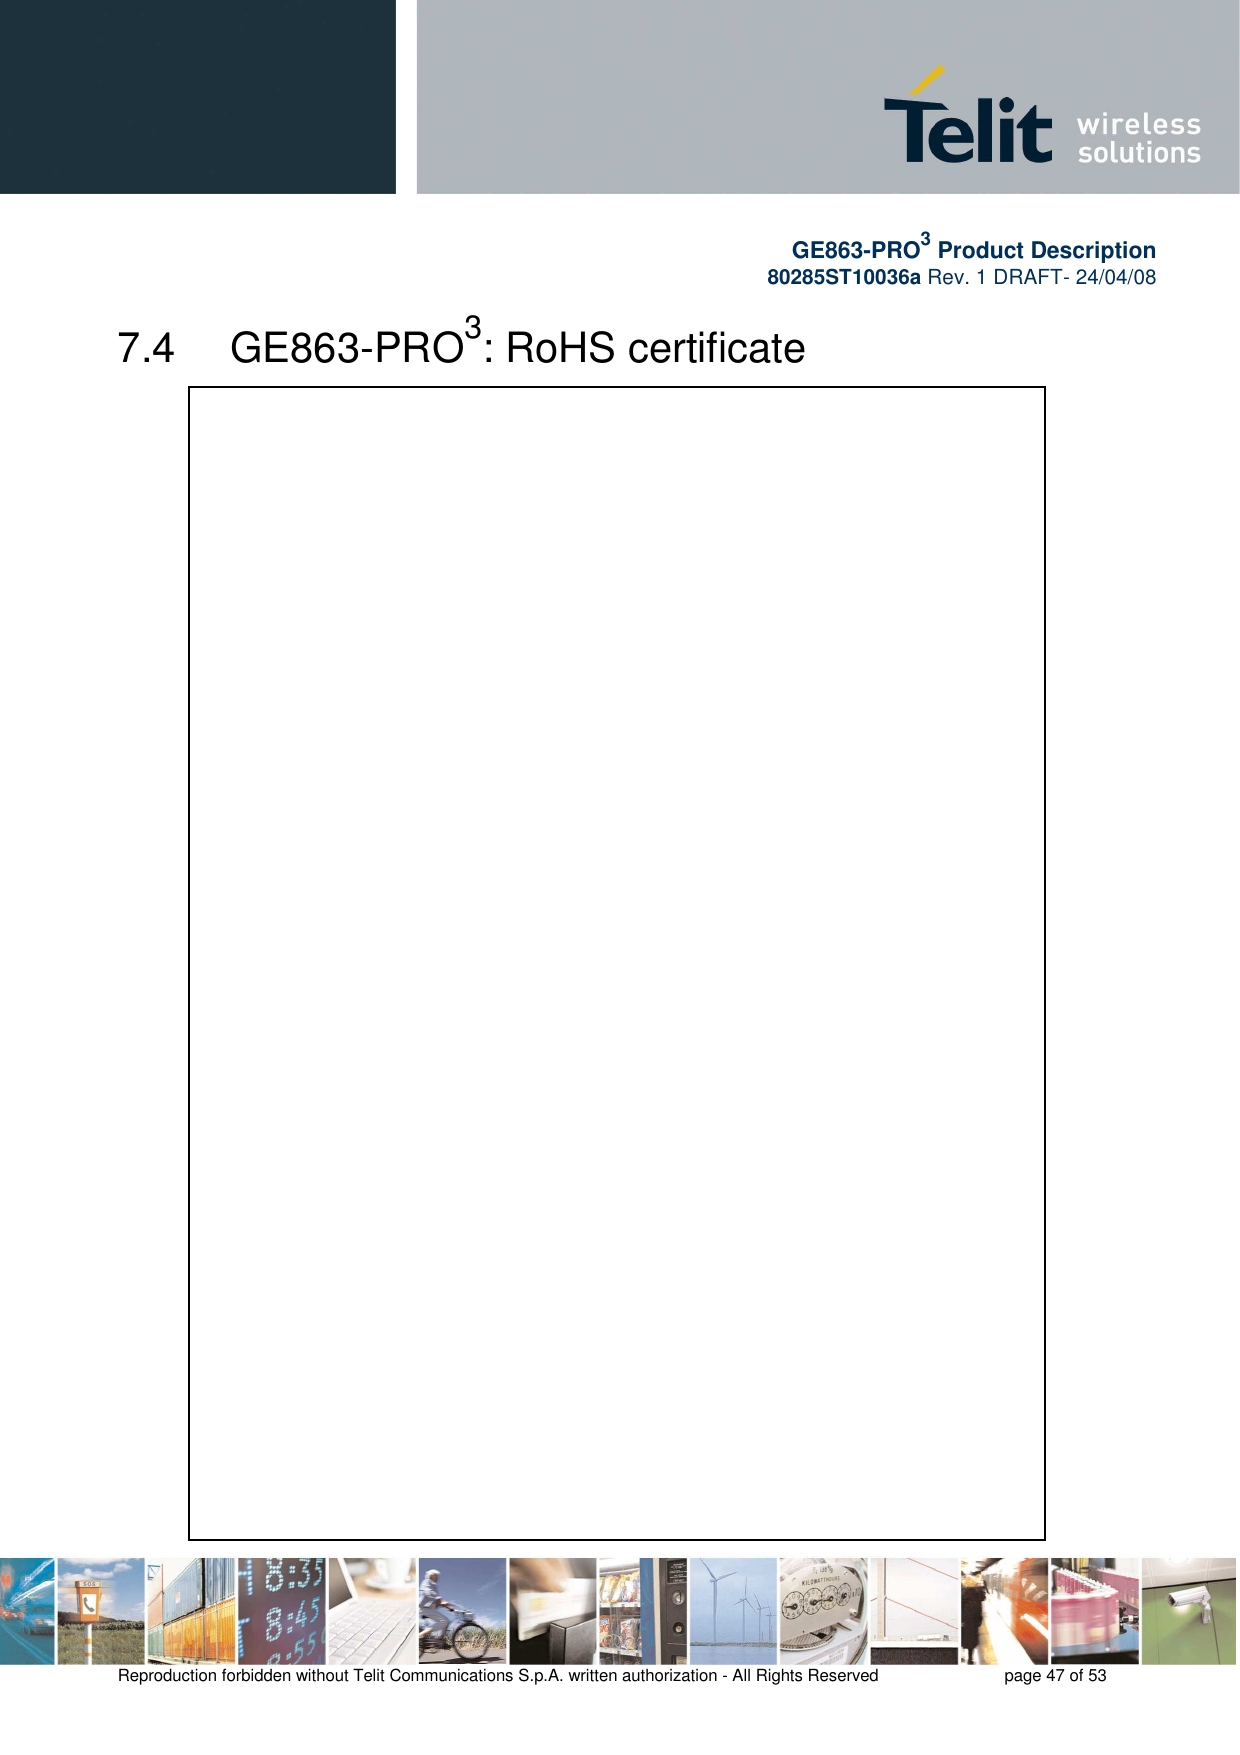       GE863-PRO3 Product Description 80285ST10036a Rev. 1 DRAFT- 24/04/08    Reproduction forbidden without Telit Communications S.p.A. written authorization - All Rights Reserved    page 47 of 53   7.4   GE863-PRO3: RoHS certificate  